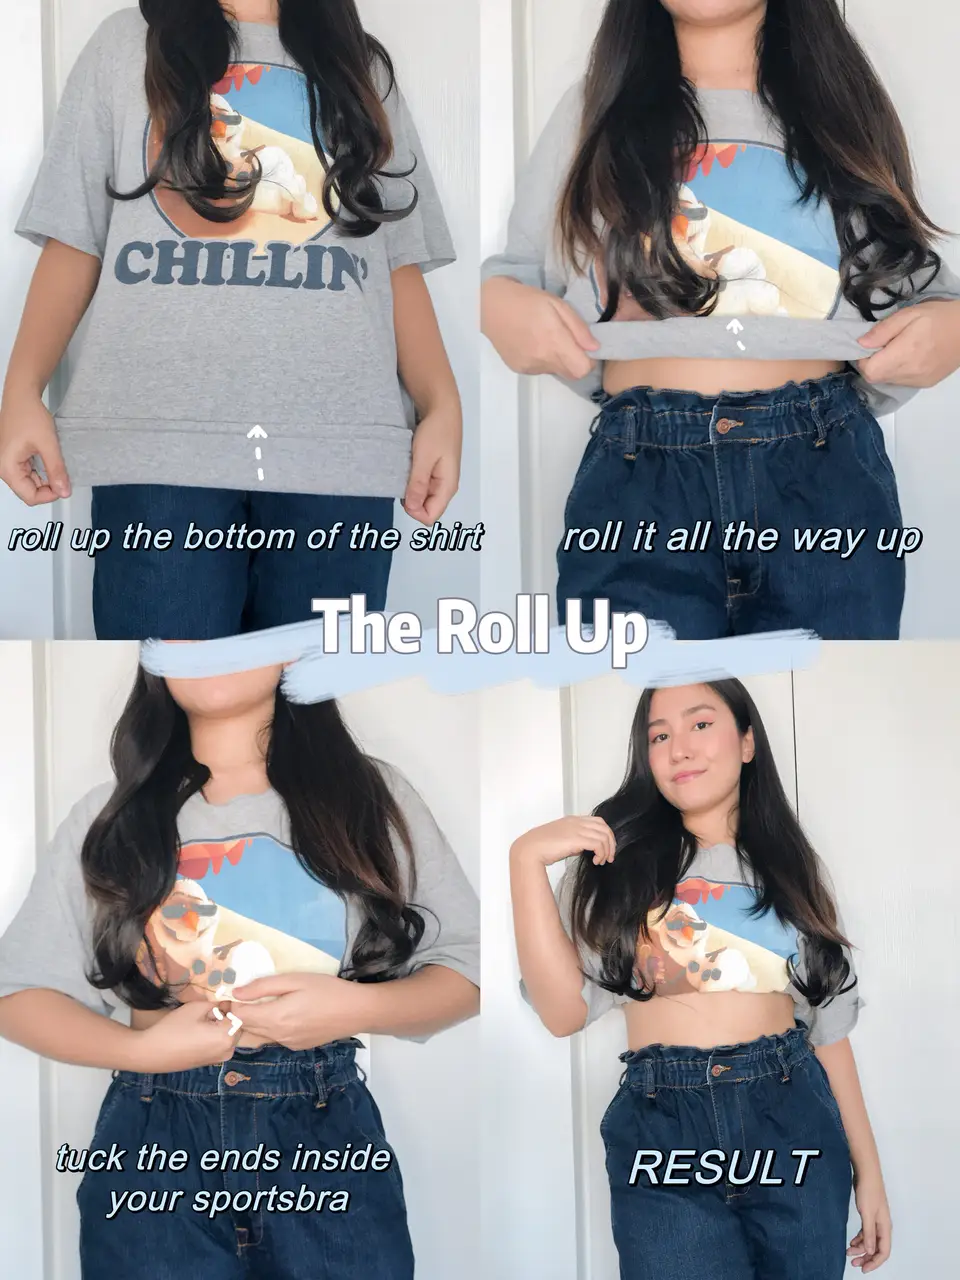 How To Make A Crop Top Out Of A T-Shirt Without Cutting